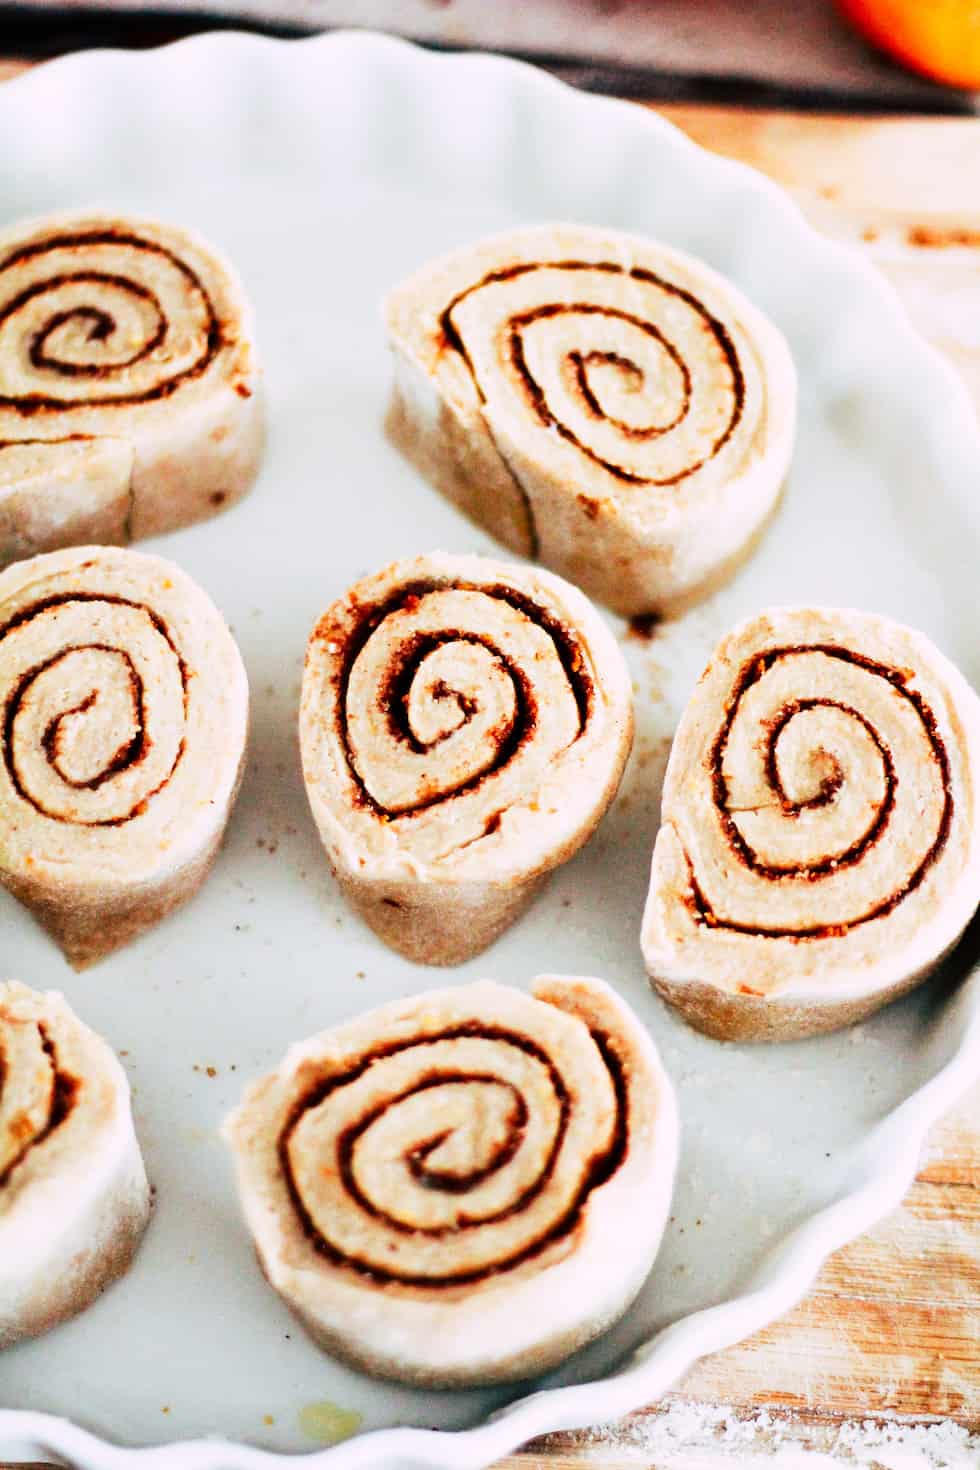 Uncooked cinnamon rolls in a white baking dish.